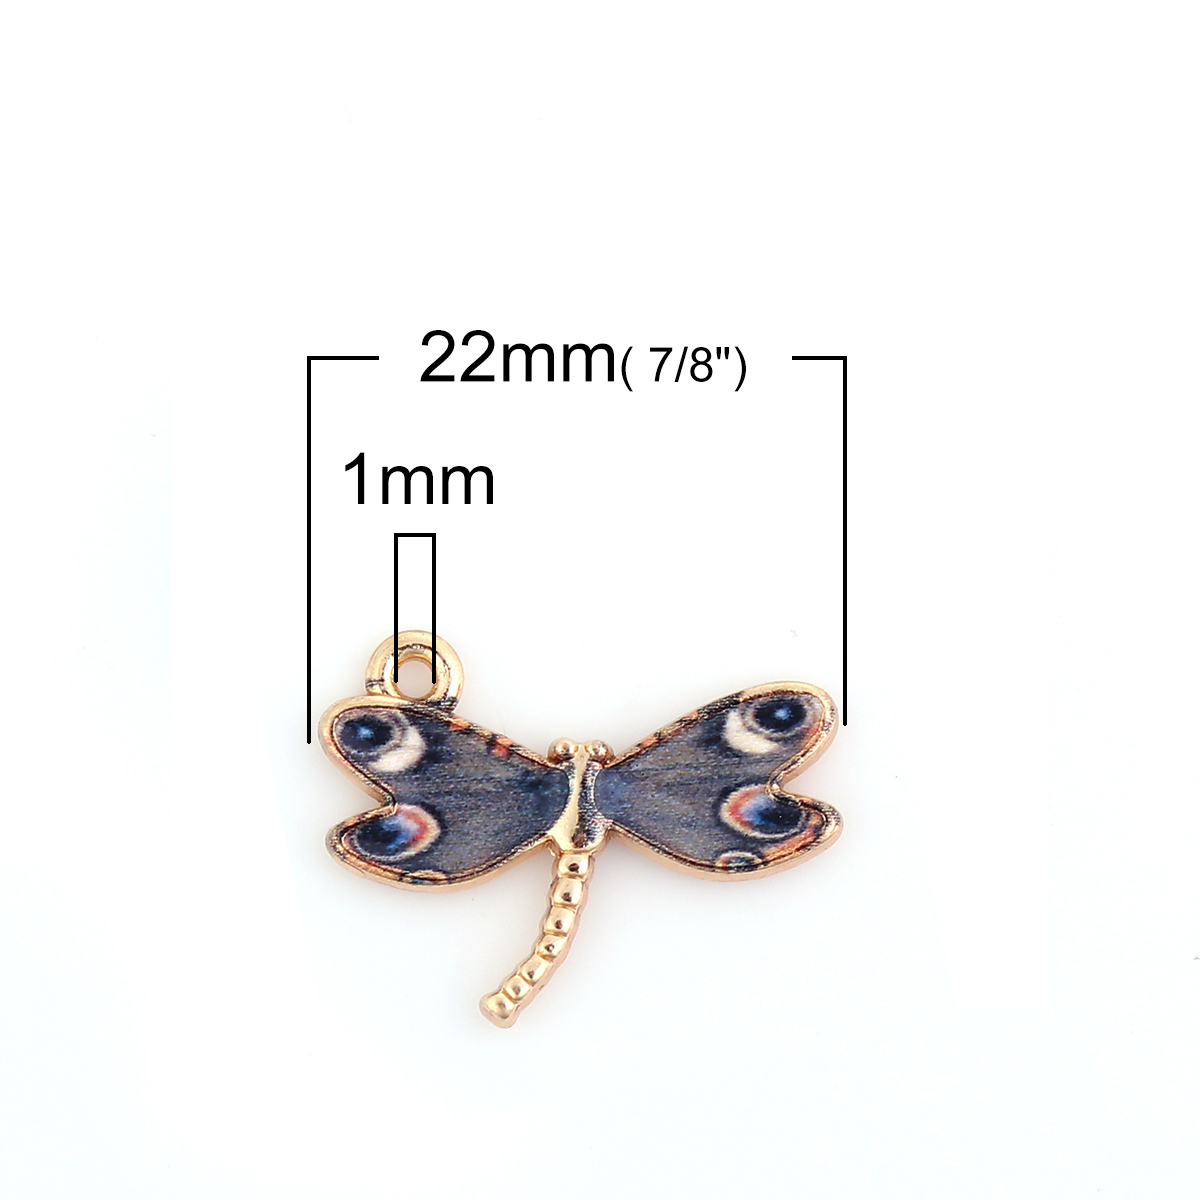 Picture of Zinc Based Alloy Charms Dragonfly Animal Gold Plated Dark Gray Enamel 22mm( 7/8") x 17mm( 5/8"), 10 PCs